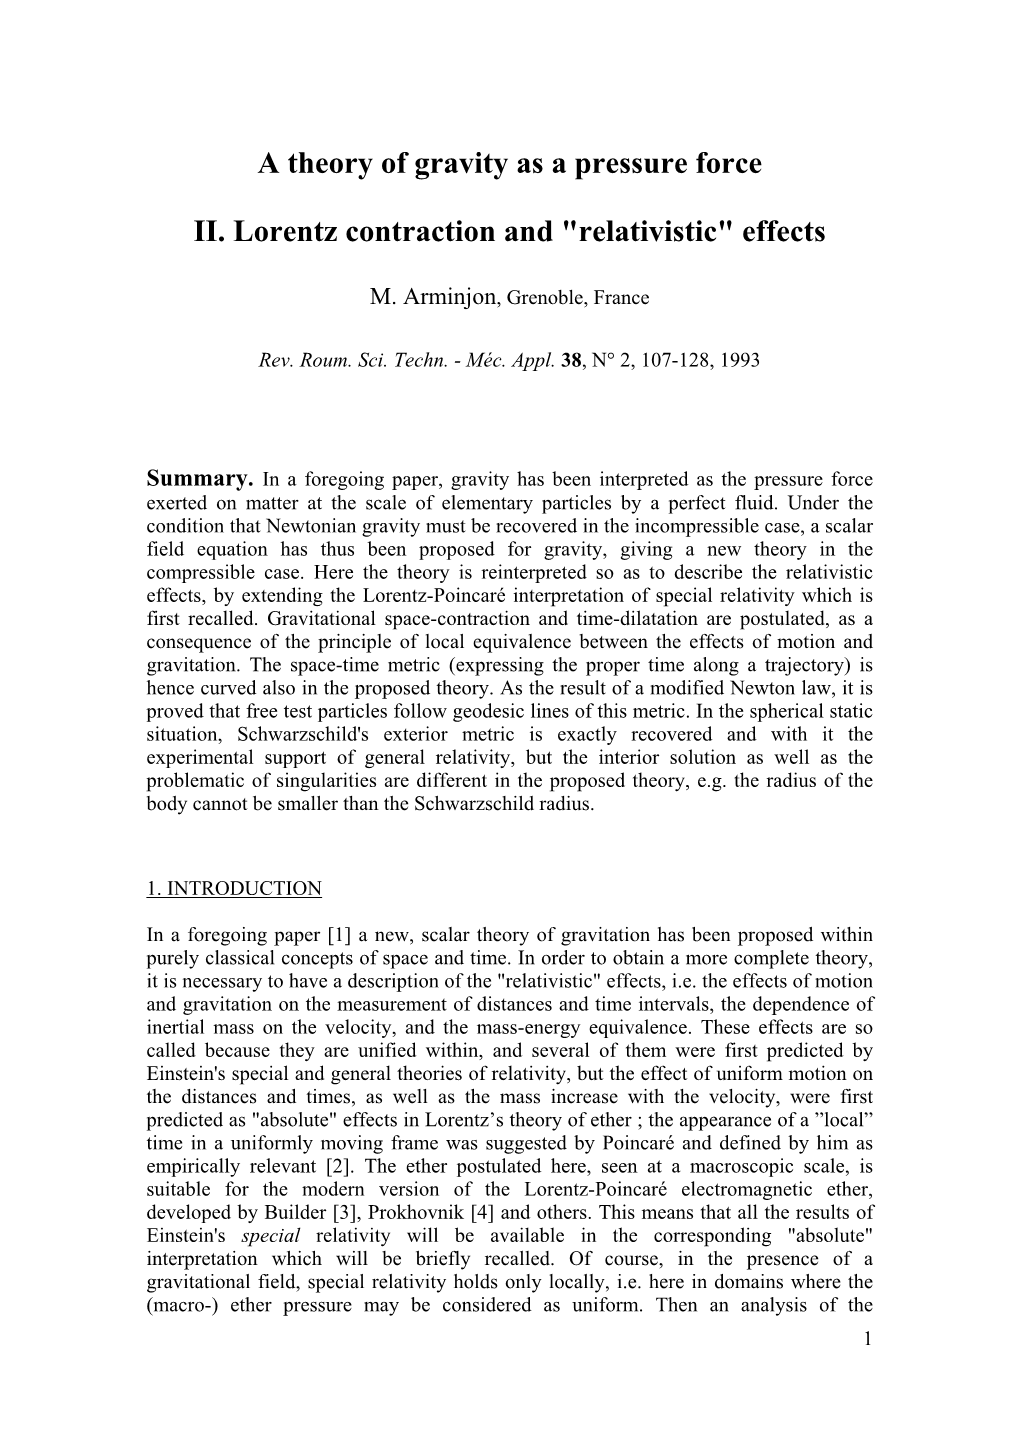 A Theory of Gravity As a Pressure Force II. Lorentz Contraction